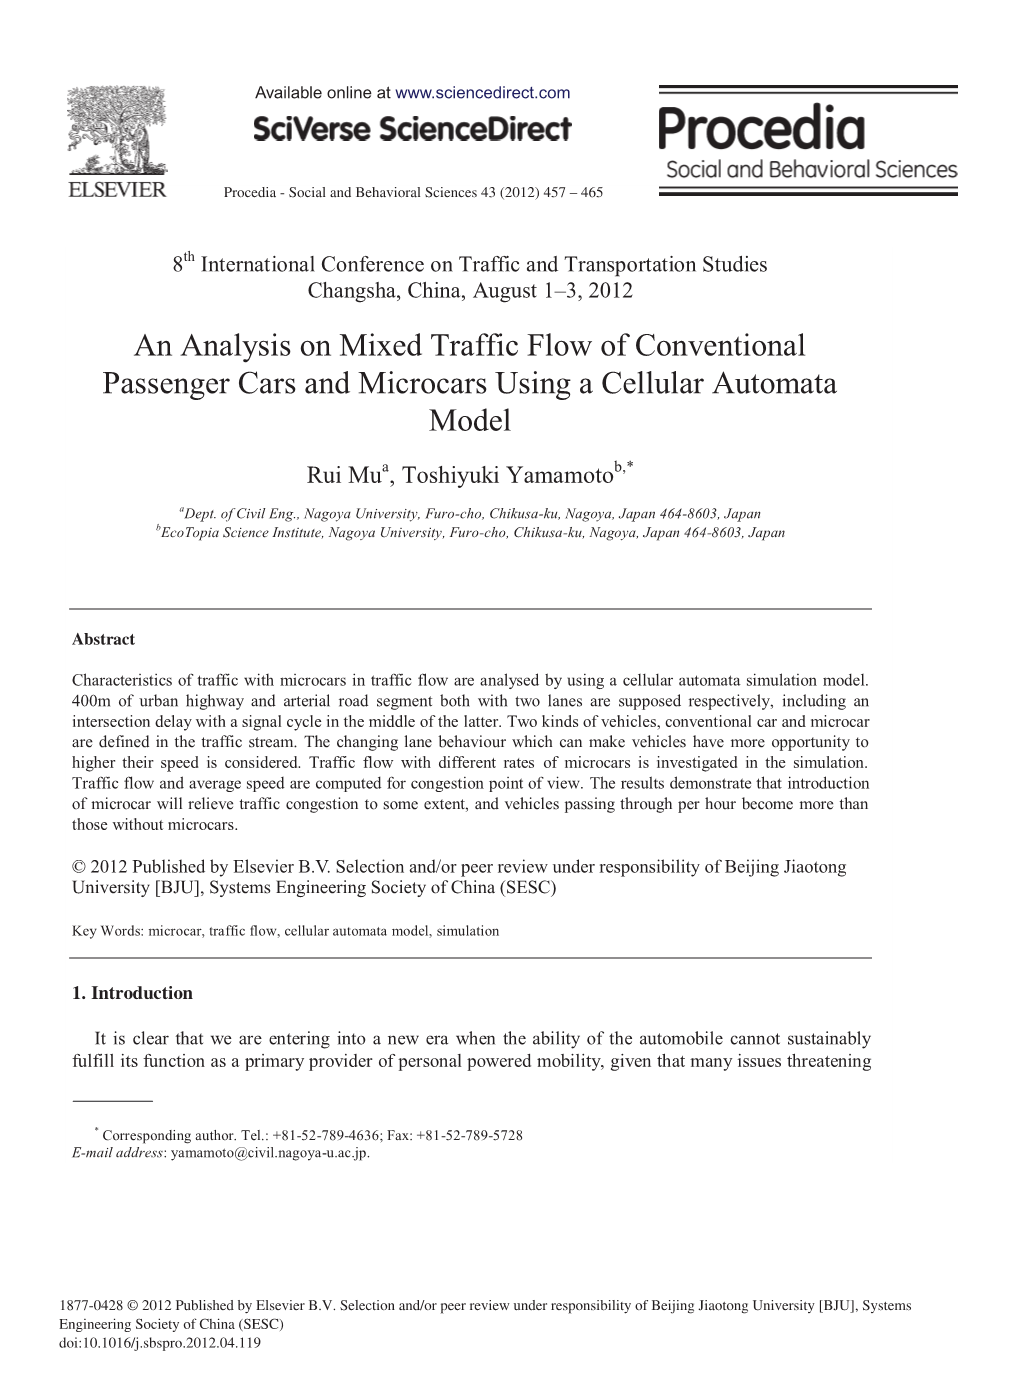 An Analysis on Mixed Traffic Flow of Conventional Passenger Cars and Microcars Using a Cellular Automata Model